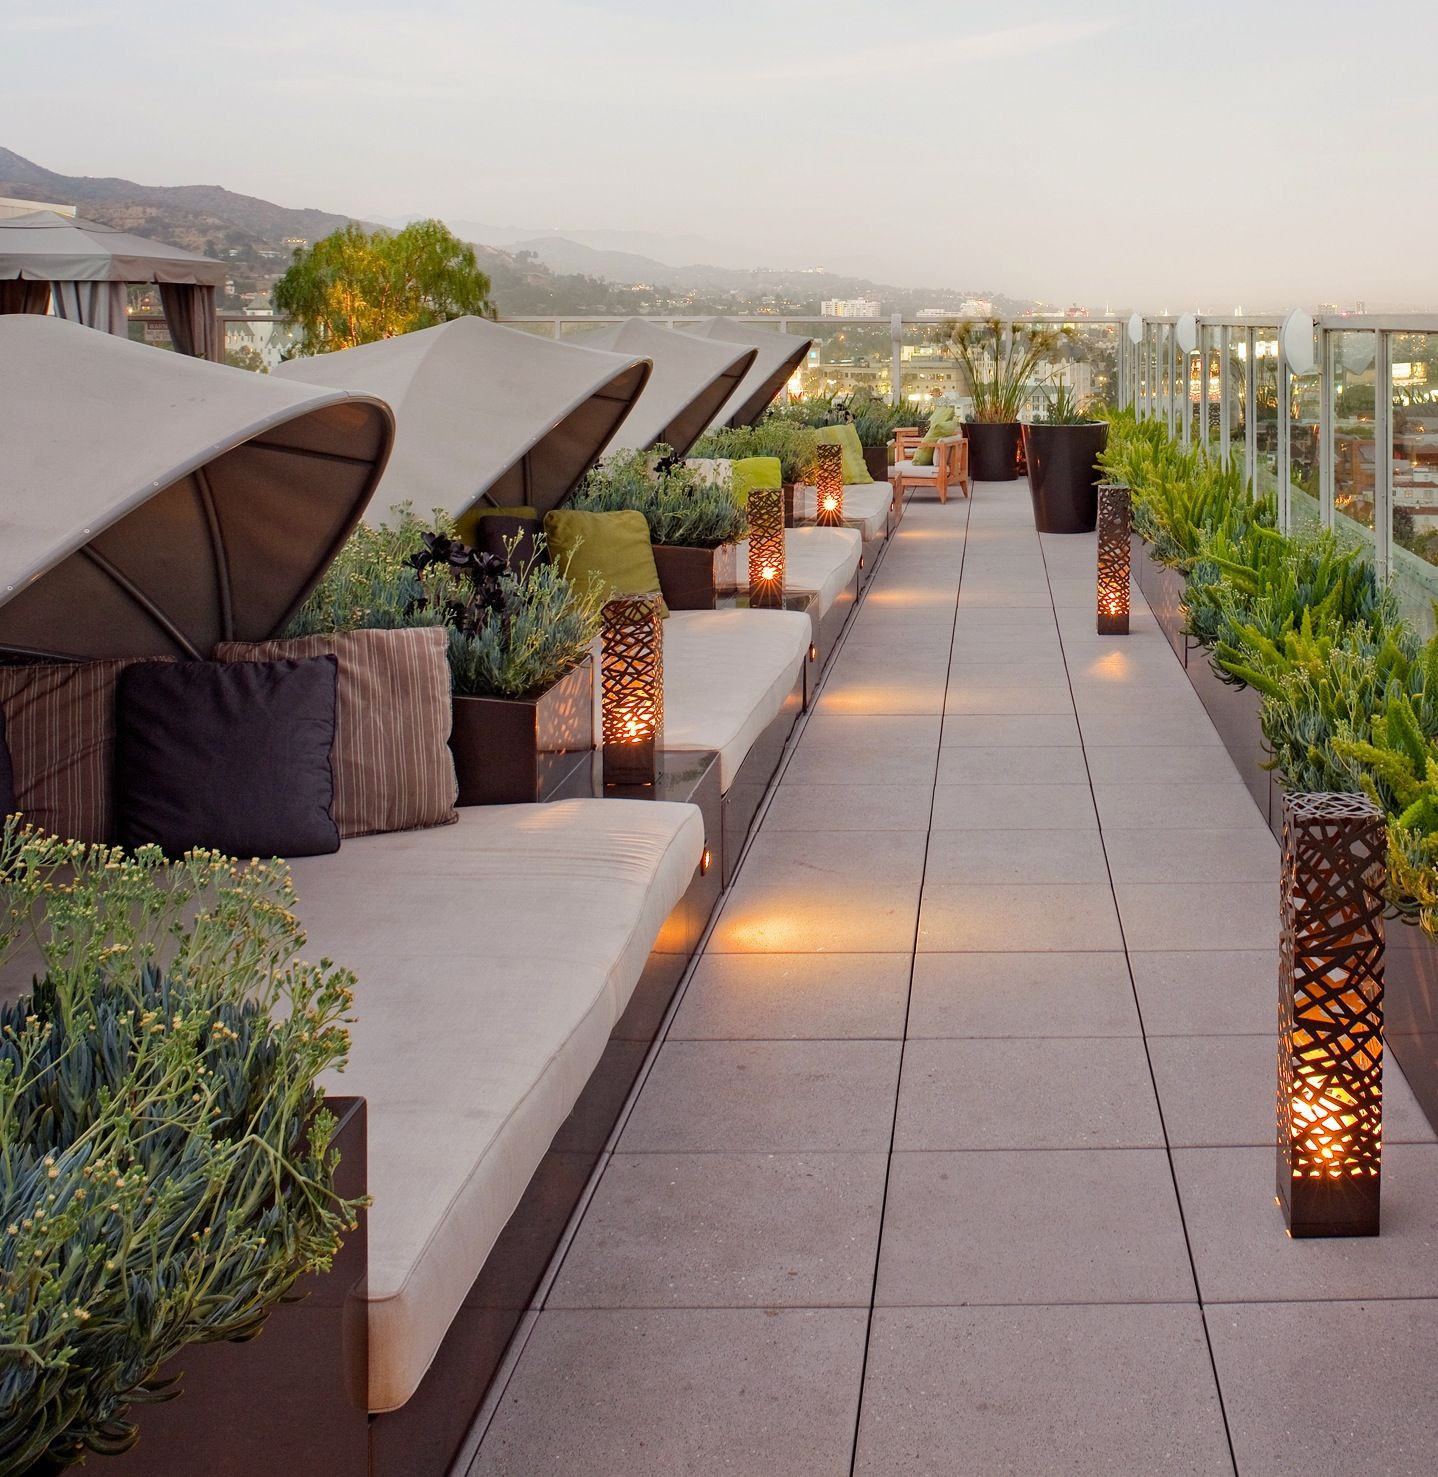 Hotel Terrace Landscape
 The Sundeck at the Andaz West Hollywood Designed by